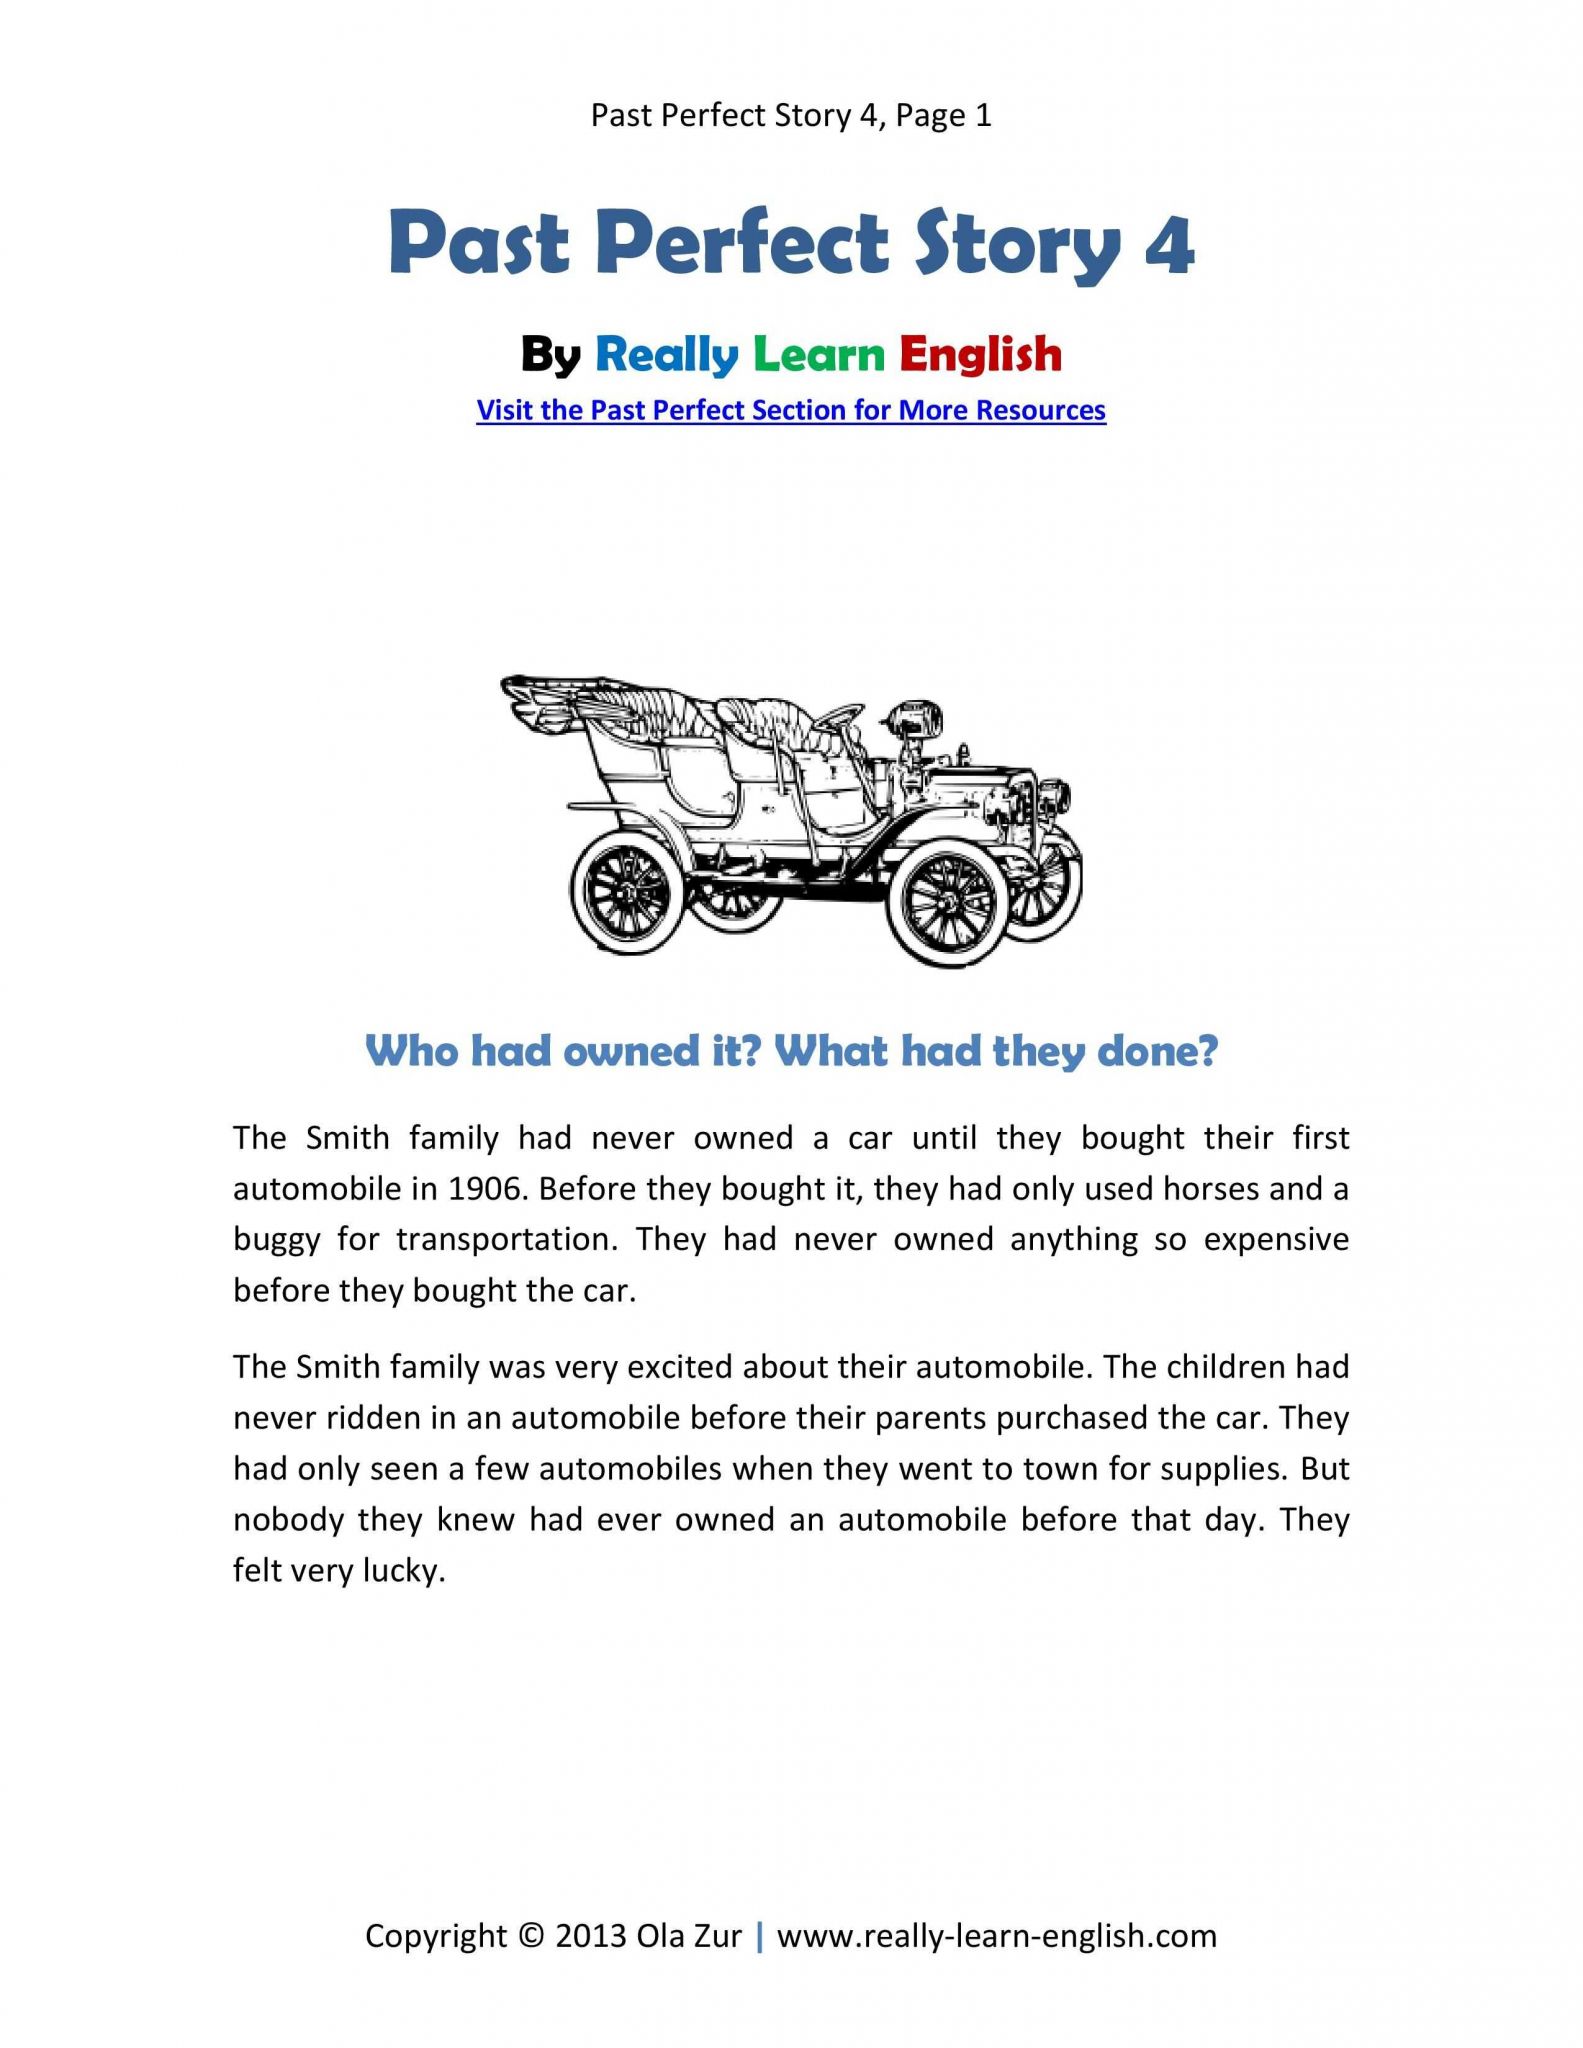 Bullying Worksheets Pdf together with Free Printable Story and Worksheets to Practice the English Past